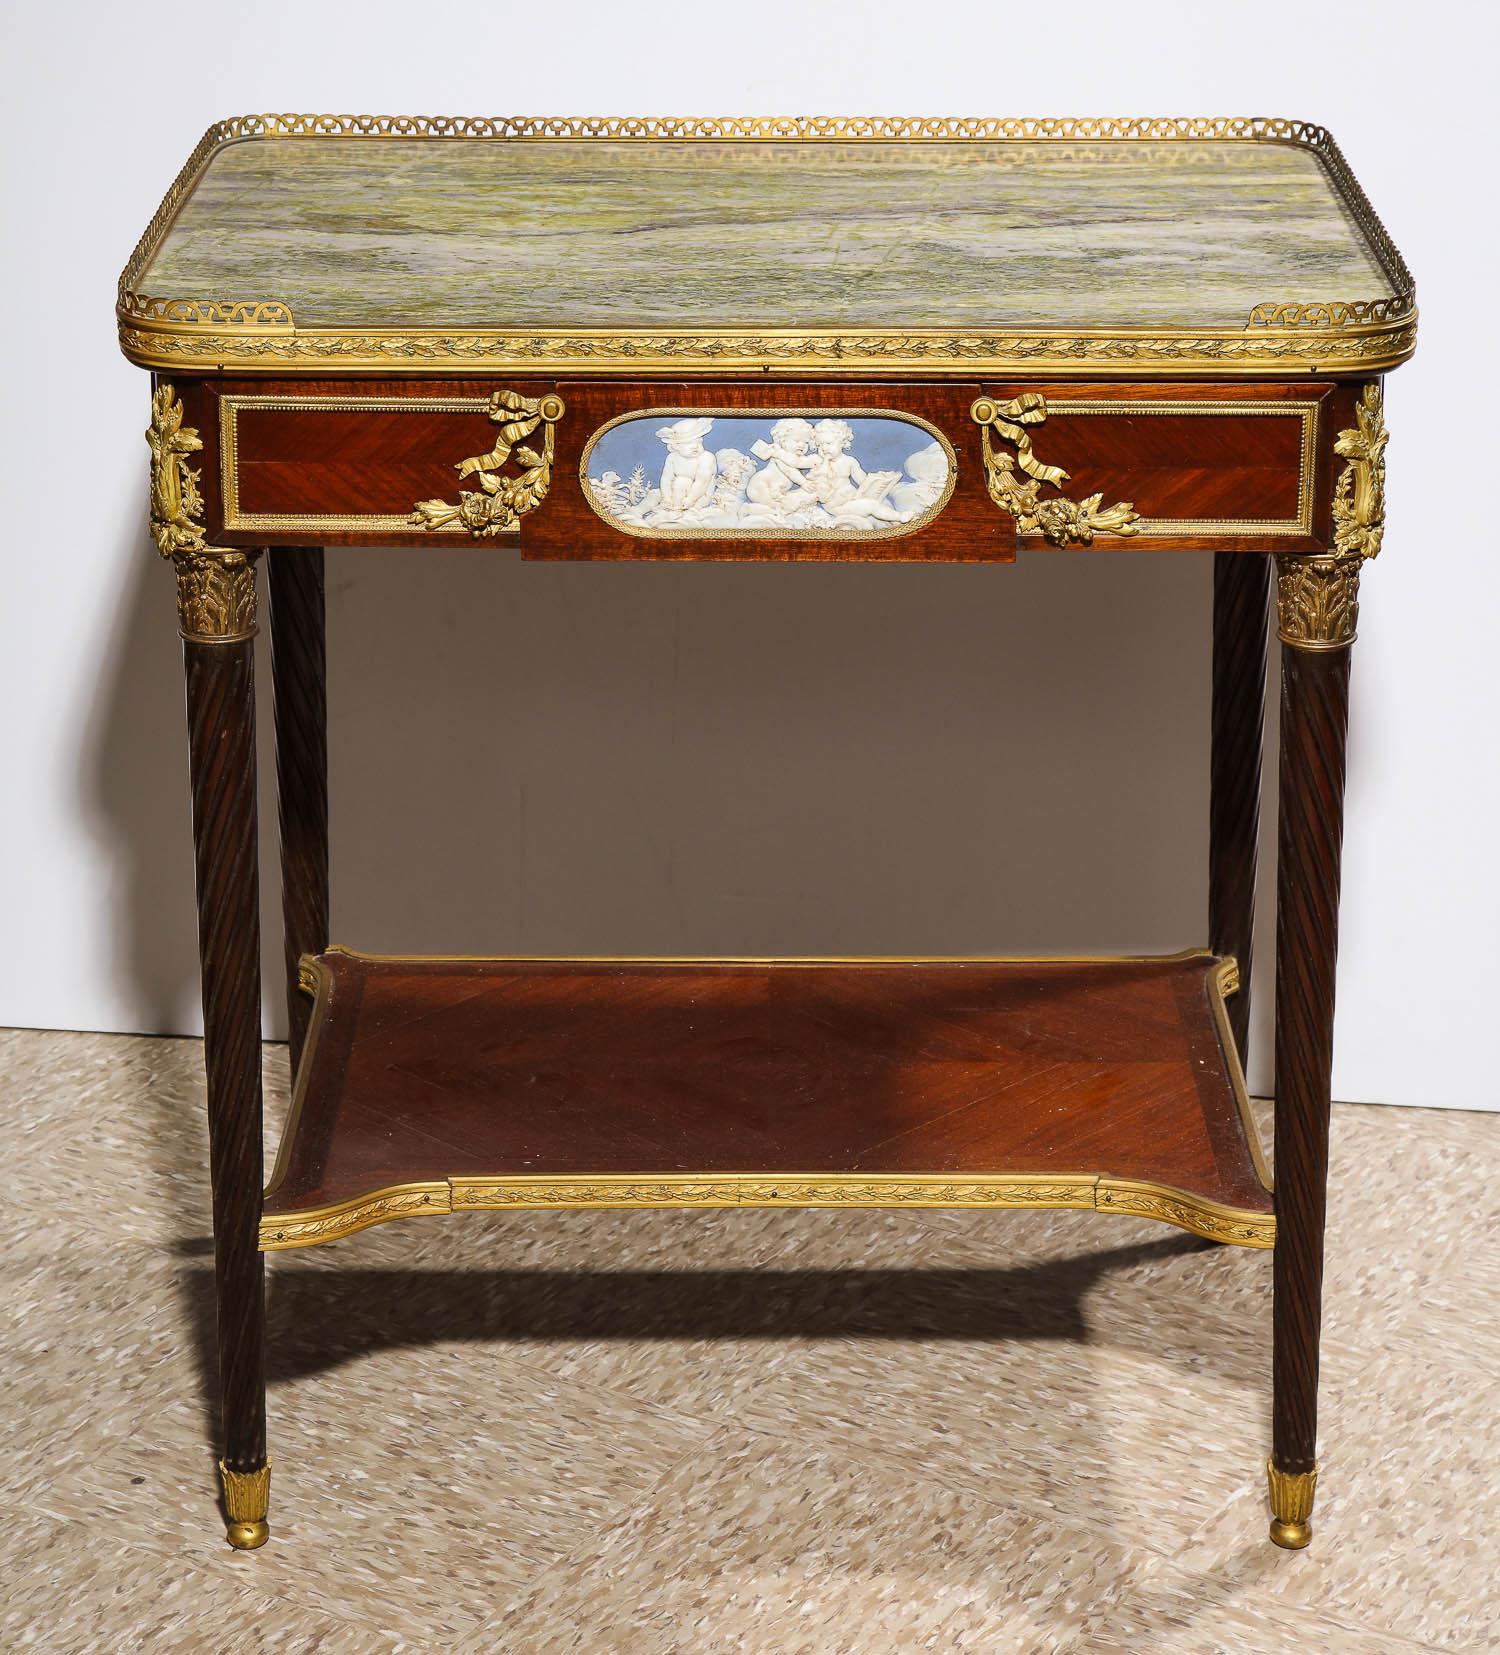 An exquisite quality French ormolu and wedgewood / jasperware mounted table with marble top.

circa 1880, attributed to Henry Dasson / Paul Sormani

Very high quality bronze mounts. With drawer. 

Excellent condition. Ready to place and